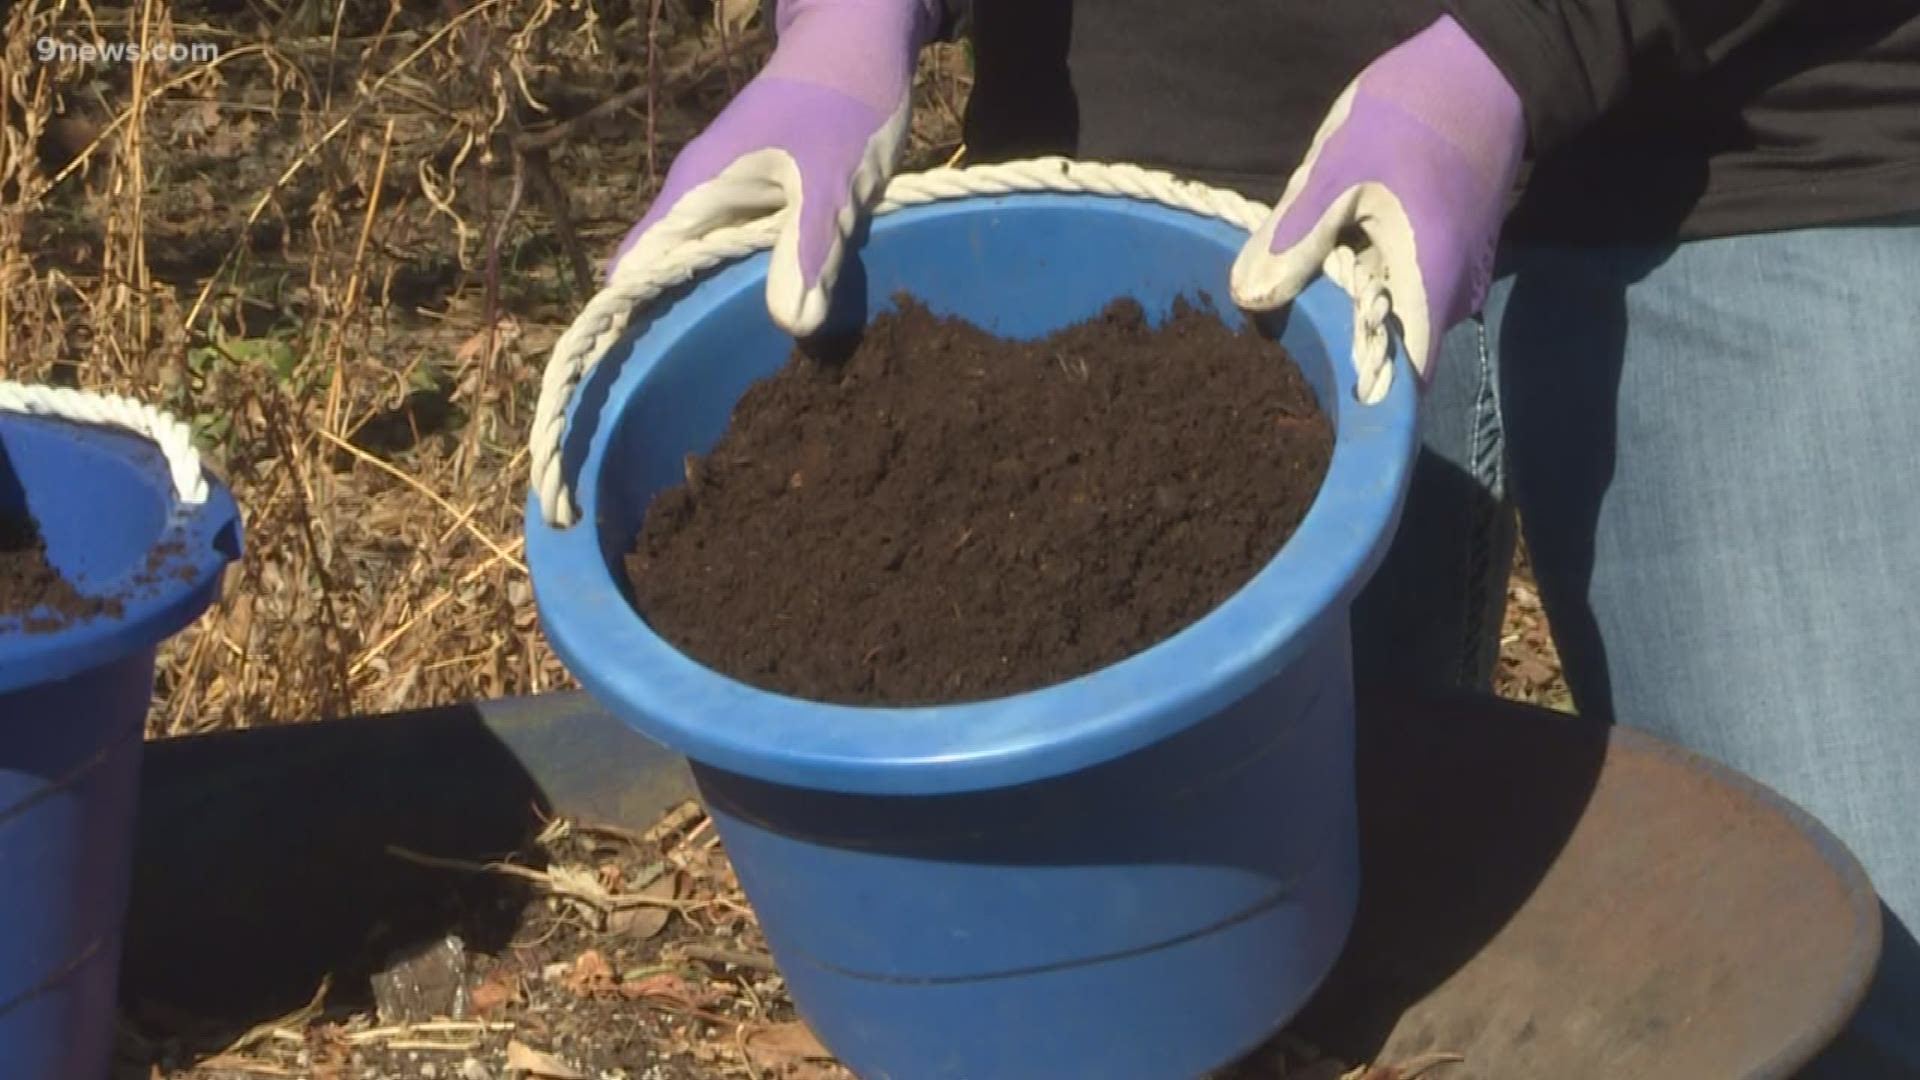 The secret to a perfect garden? Cow manure.